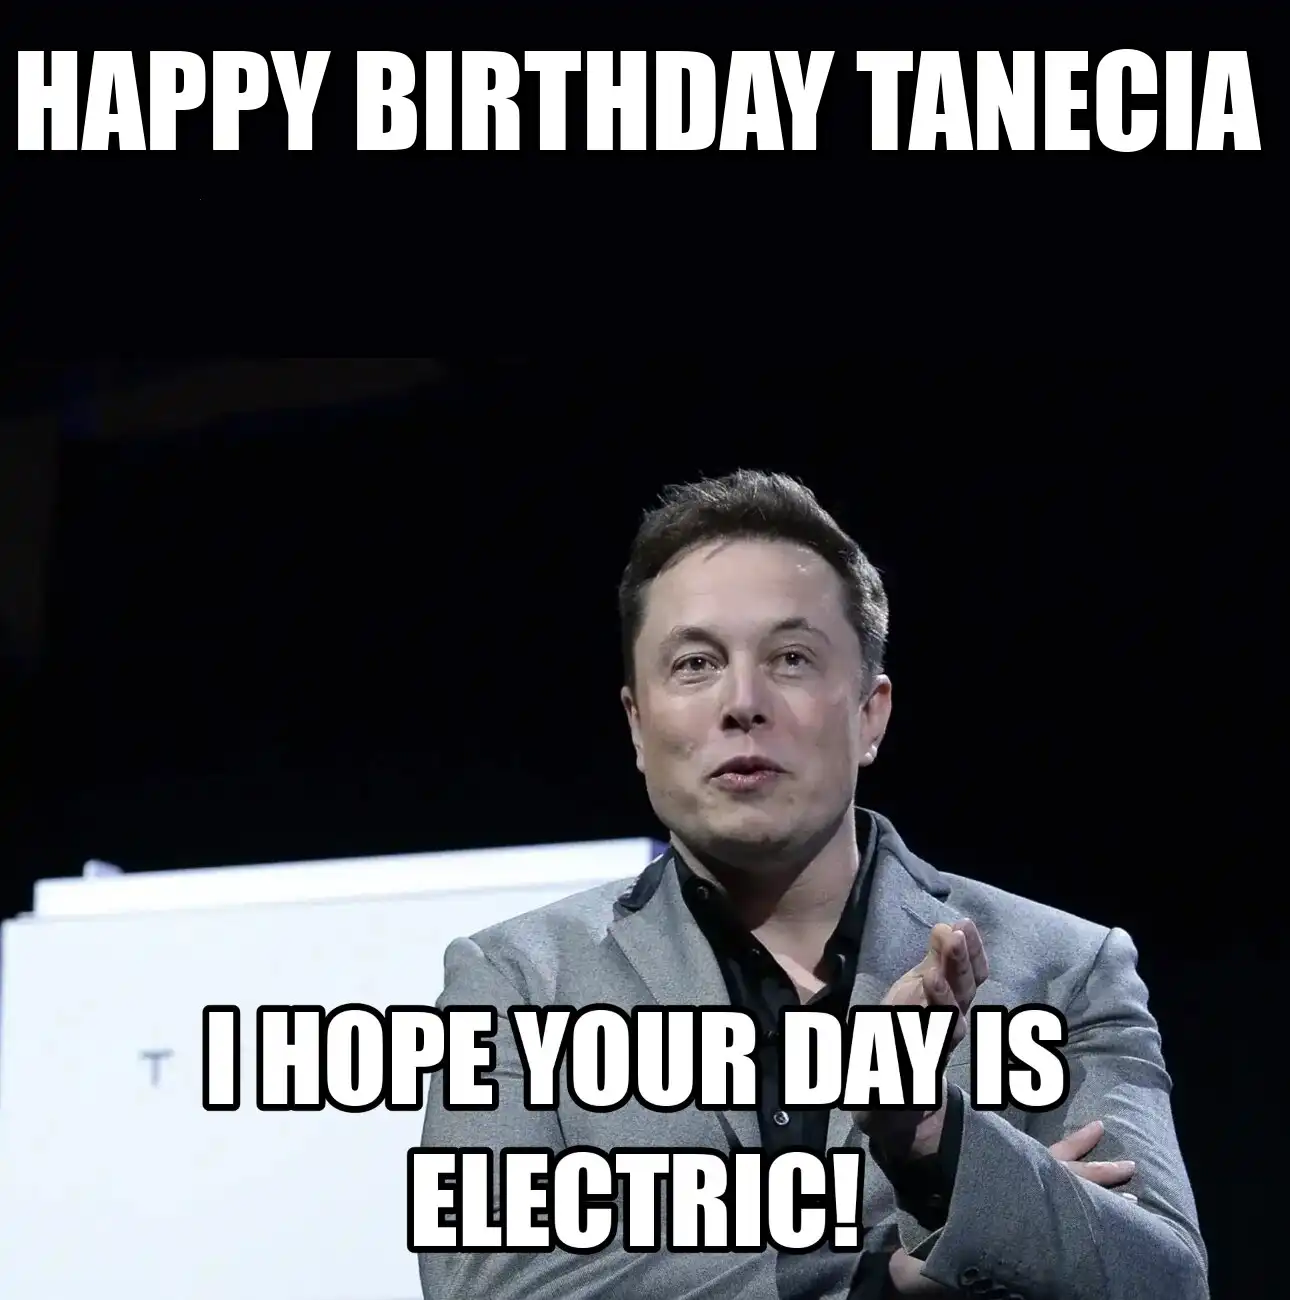 Happy Birthday Tanecia I Hope Your Day Is Electric Meme